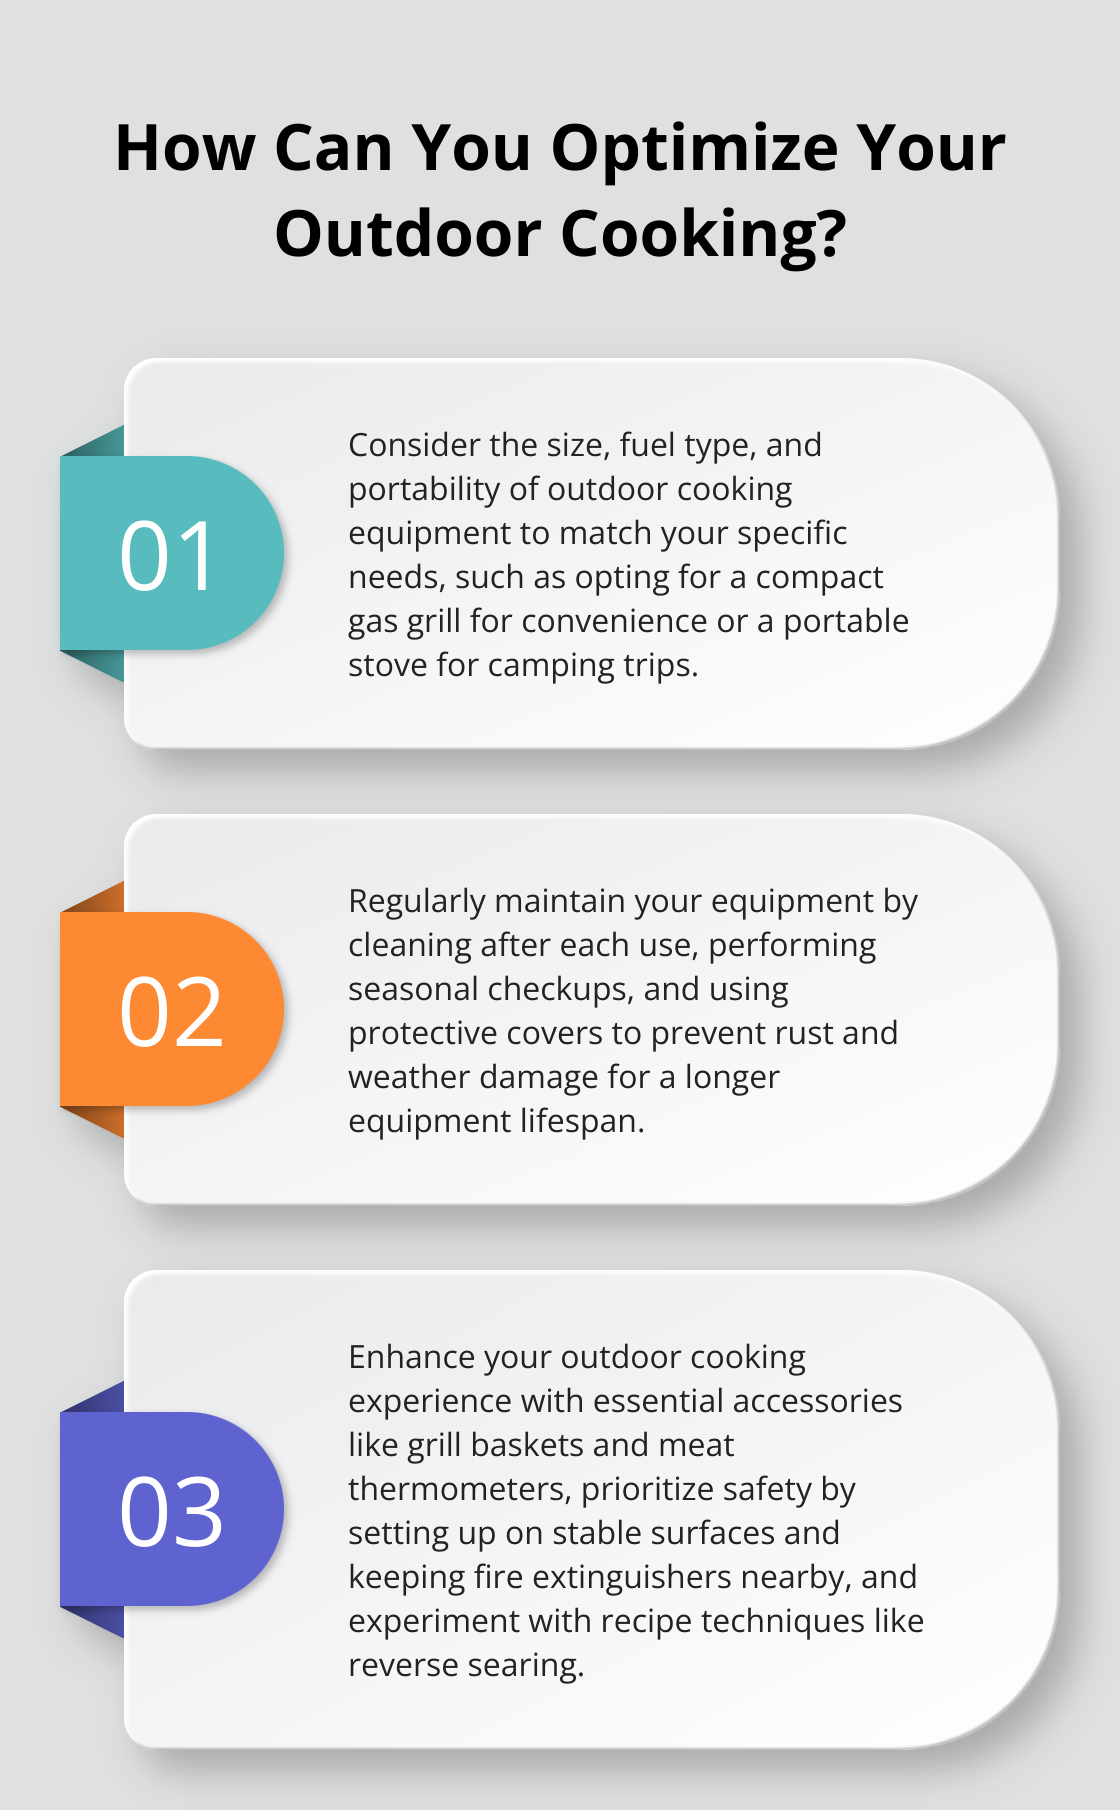 Fact - How Can You Optimize Your Outdoor Cooking?